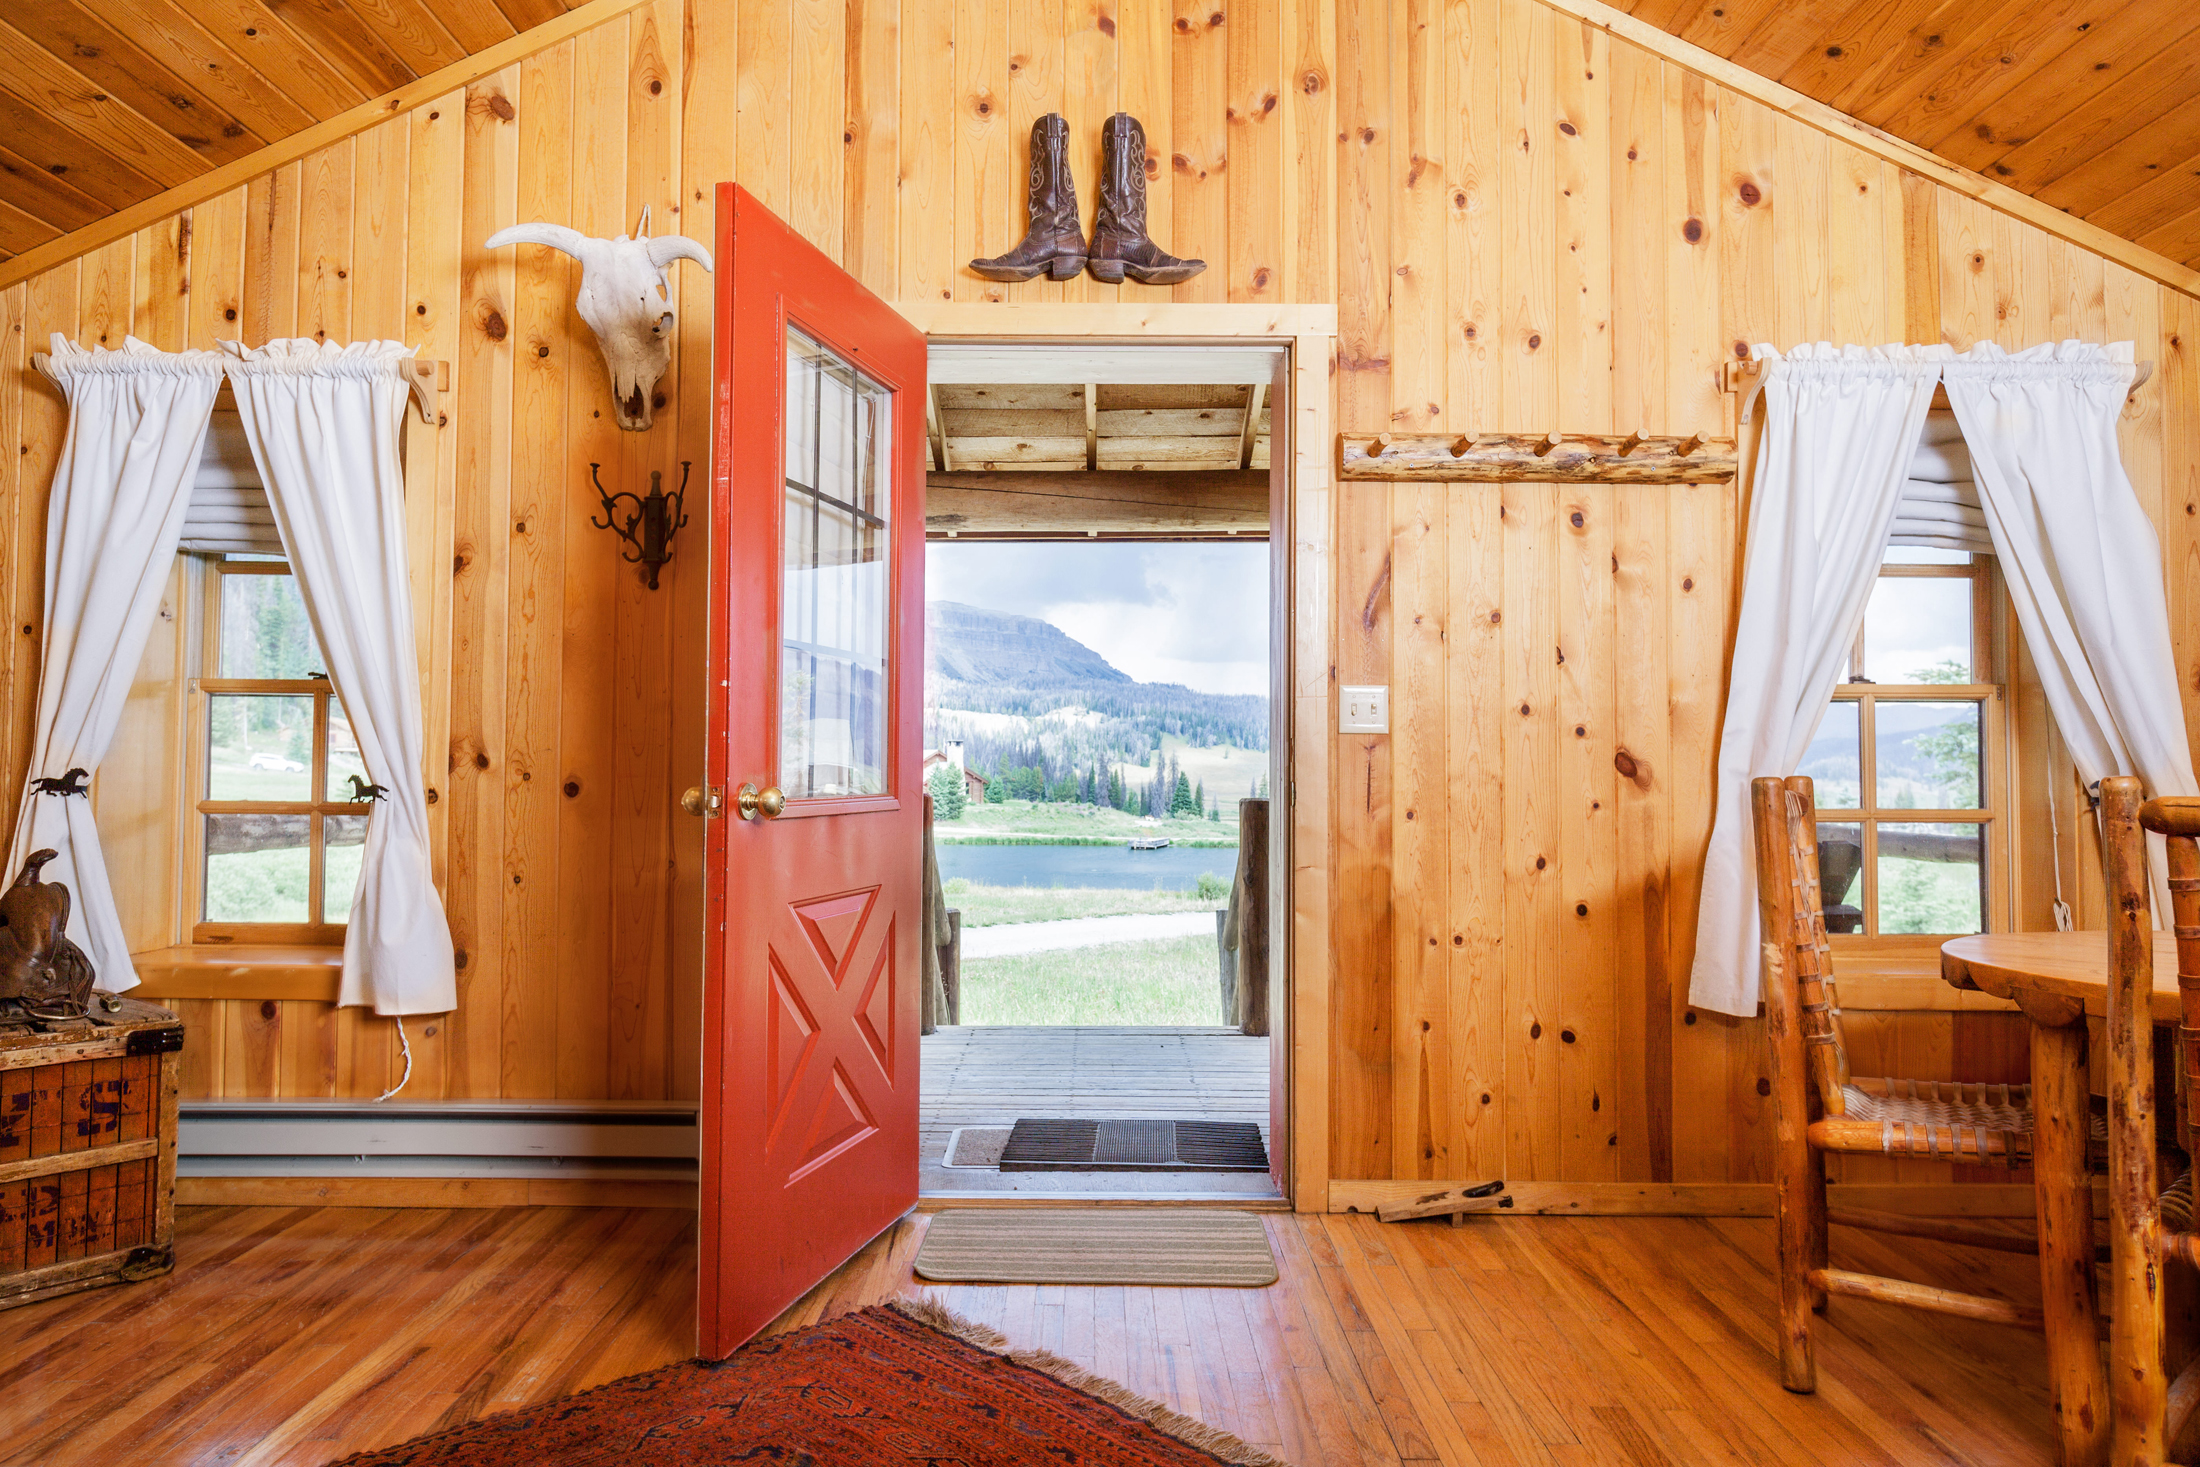 Encouraging its readers to “Go Off Grid” at Brooks Lake Lodge, National Geographic Traveler suggests canoeing, hiking or horseback riding in the spectacular surrounding Wyoming backcountry.